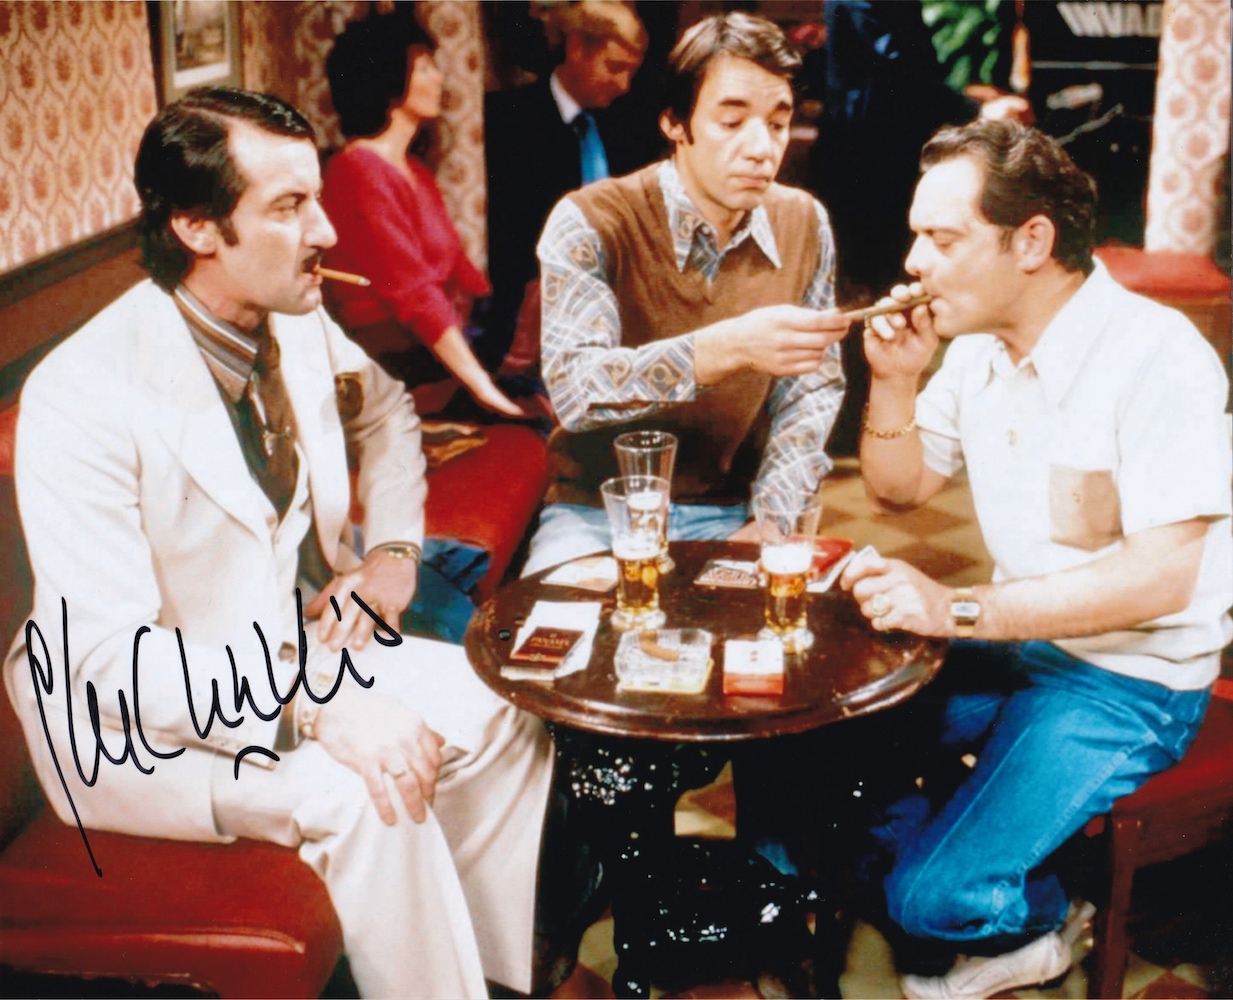 John Challis Only Fools and Horses Actor 10x8 Signed Photo. Good condition. All autographs come with